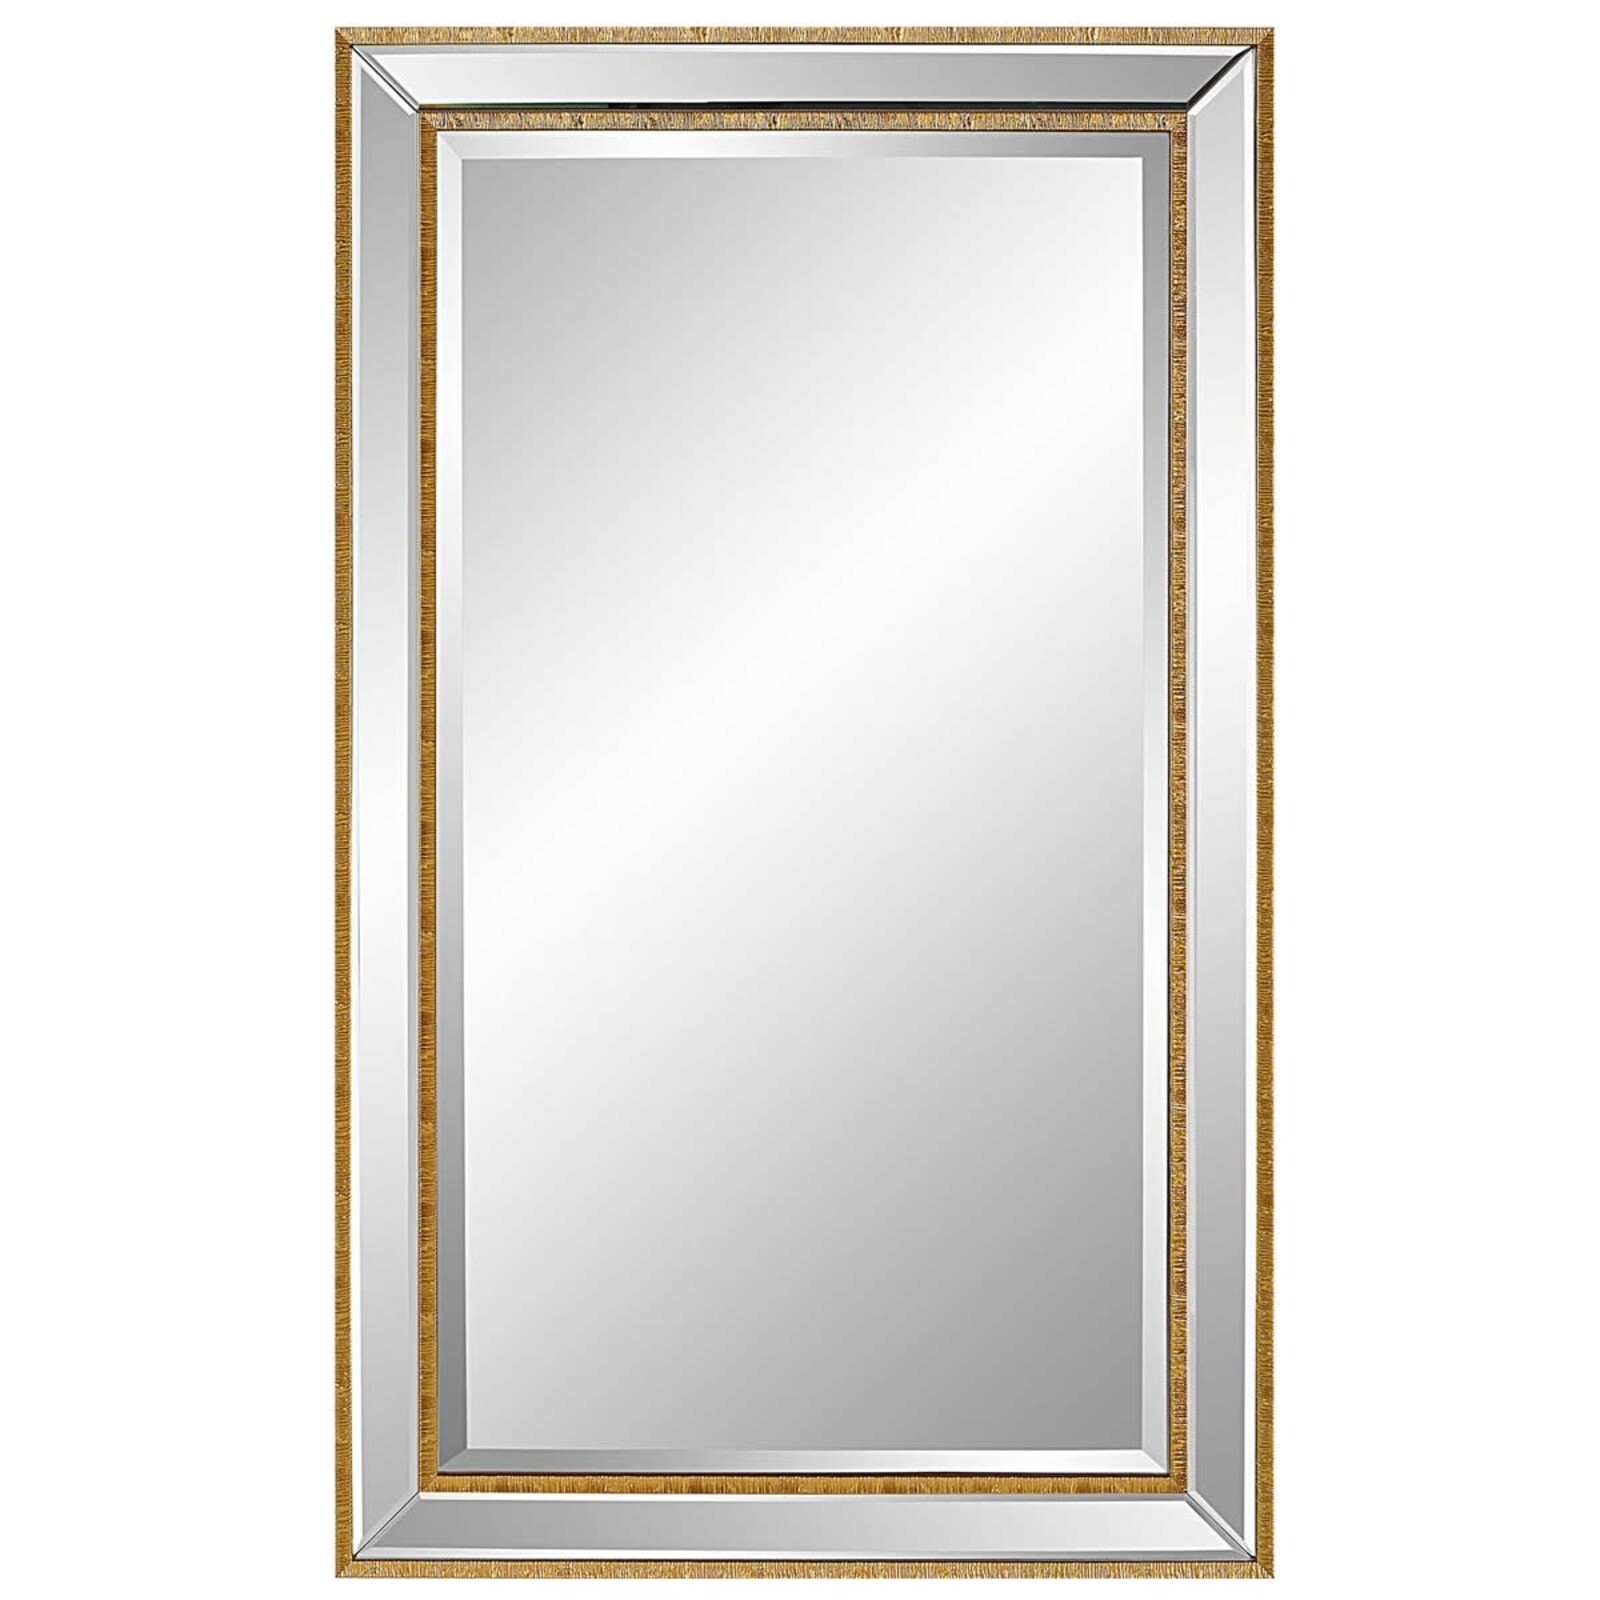 Uttermost Beveled Mirror with Gold Accents   W00553 loading=